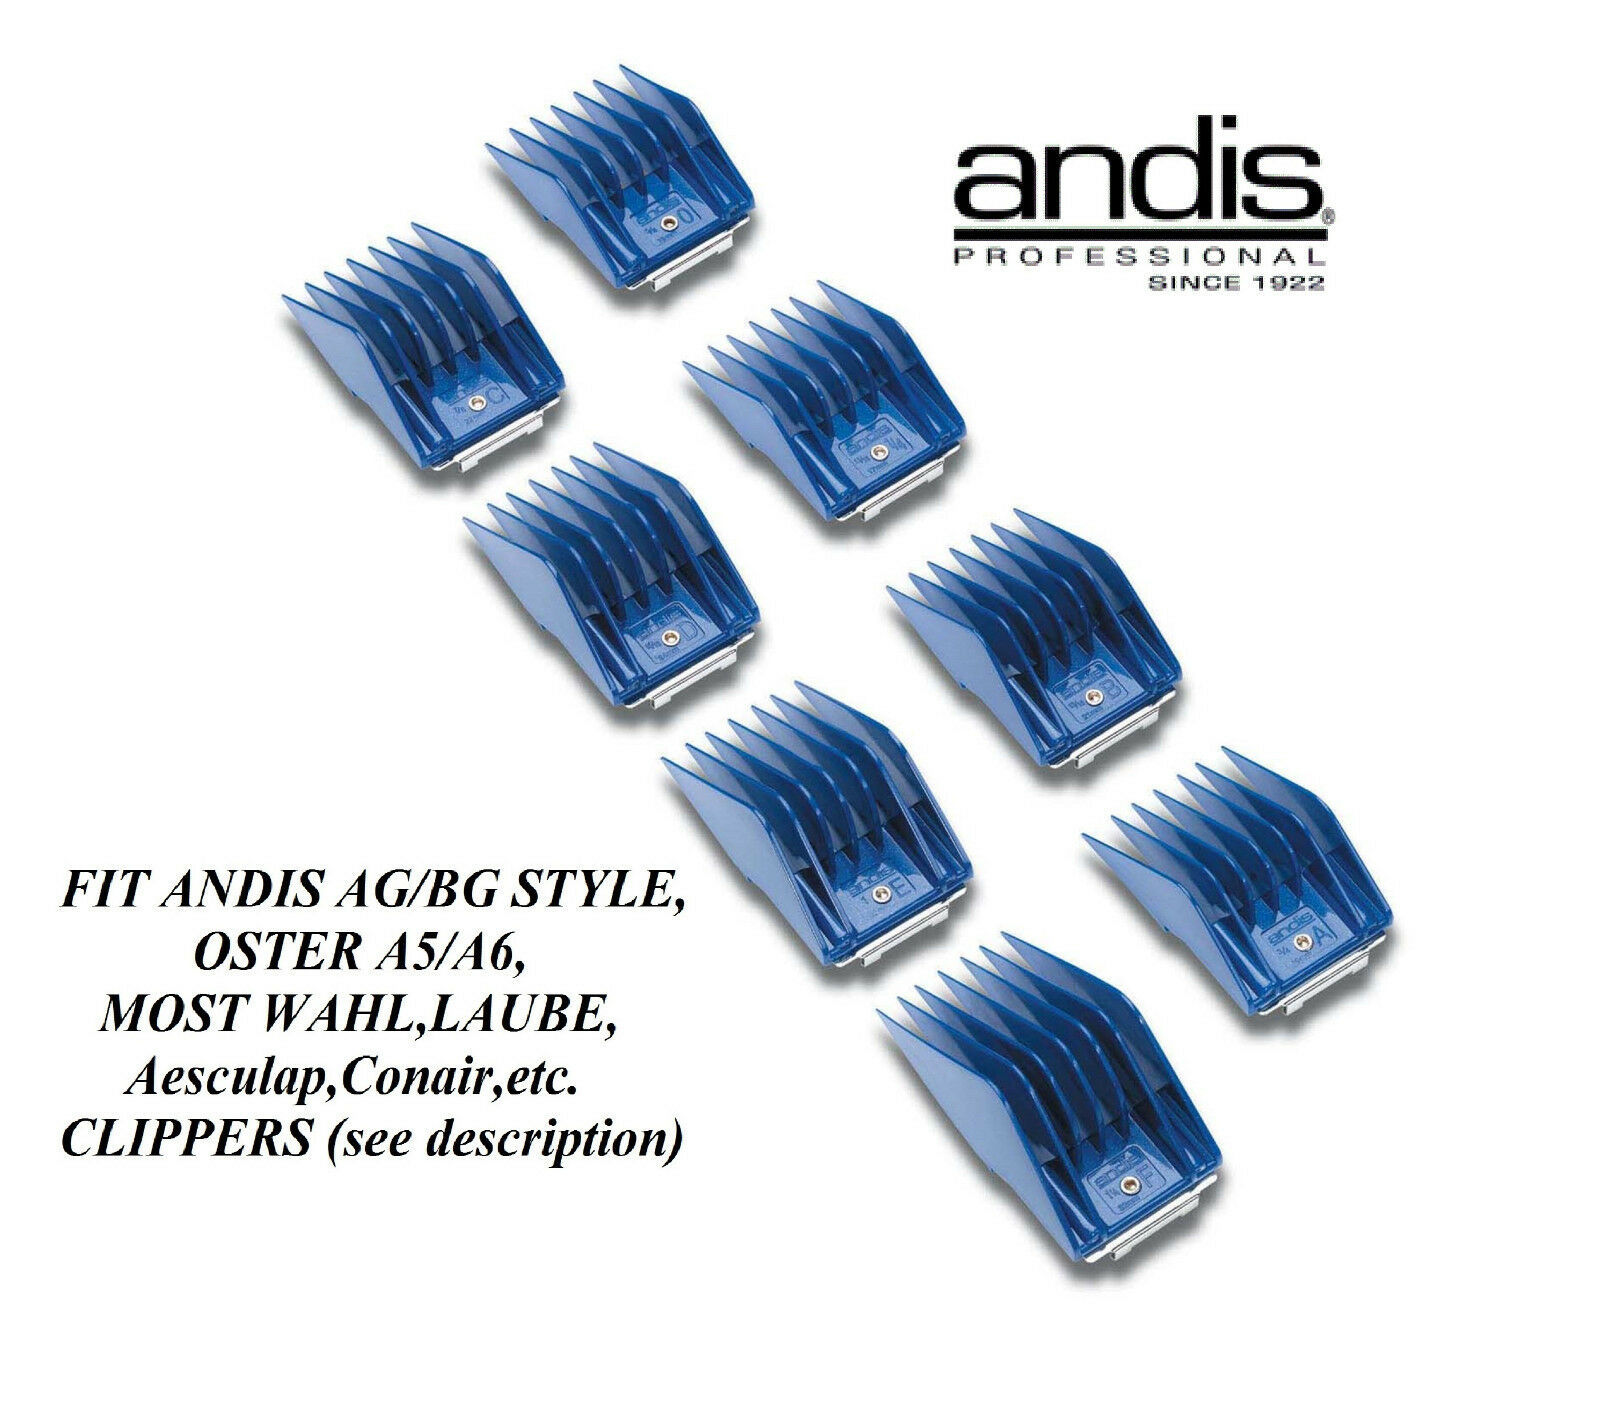 ANDIS 8 LARGE SIZE Guide ATTACHMENT BLADE COMB SET*Fit Many Oster,Wahl Clippers